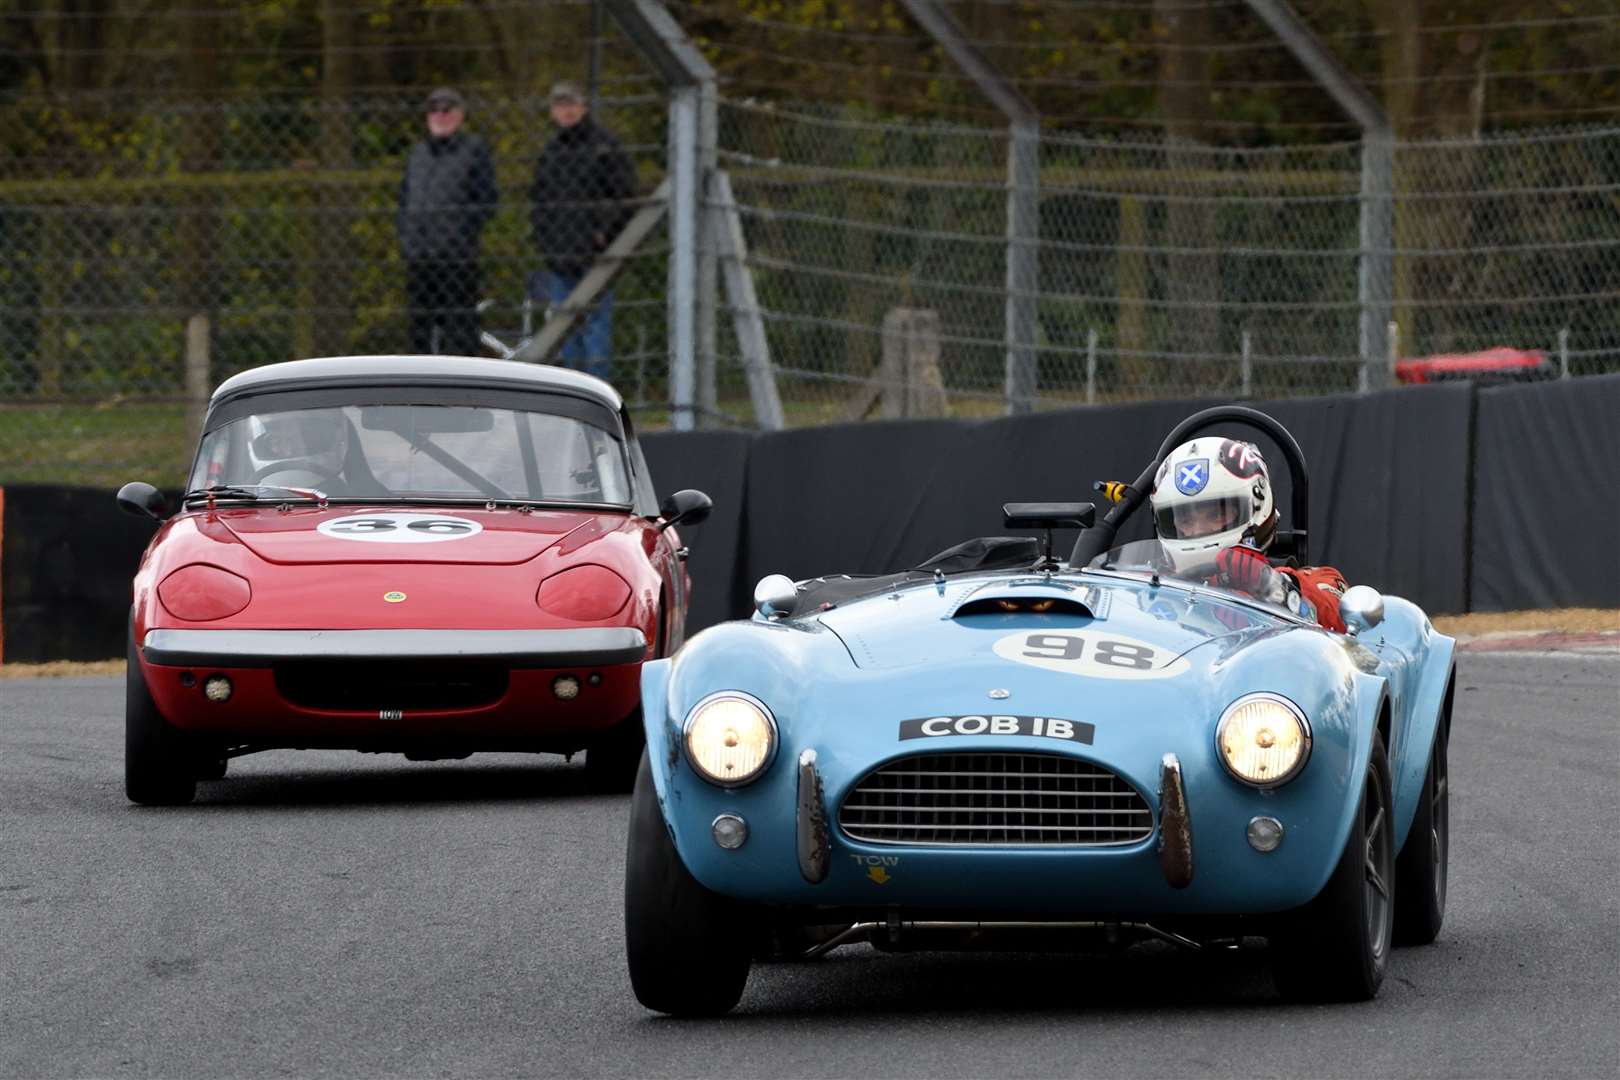 Kevin Kivlochan (98) won the Historic Road Sports race in his AC Cobra, after a race-long duel with Frazer Gibney in his Lotus S1